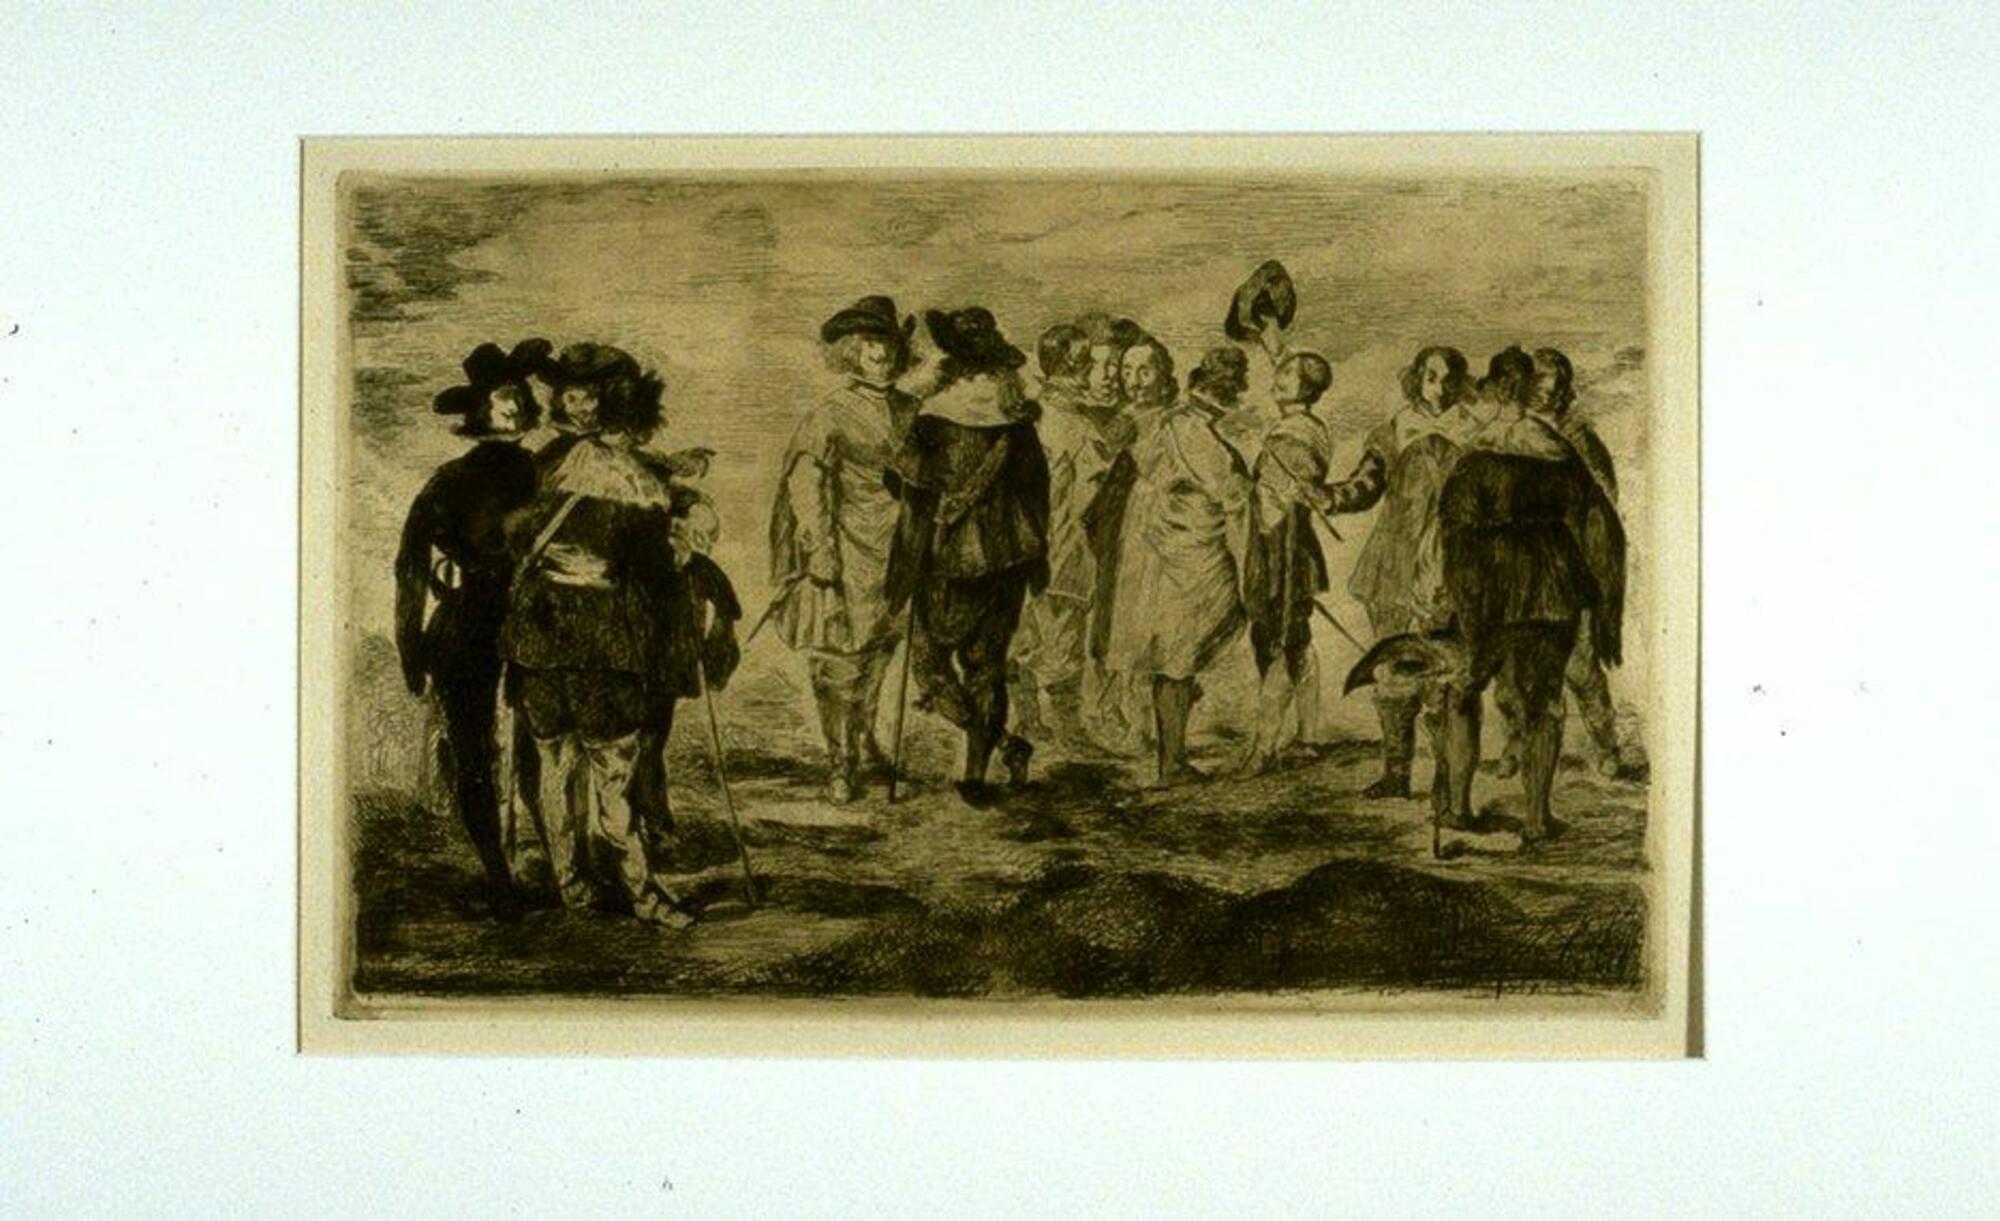 The image depicts thirteen men, arranged in three groups and facing in various directions, all standing in a generic outdoor setting. They wear seventeenth century-style costume consisting predominantly of black coats and trousers with white square collars. Several wear black hats, and one waves his hat in the air. The majority either carry or lean on swords. 